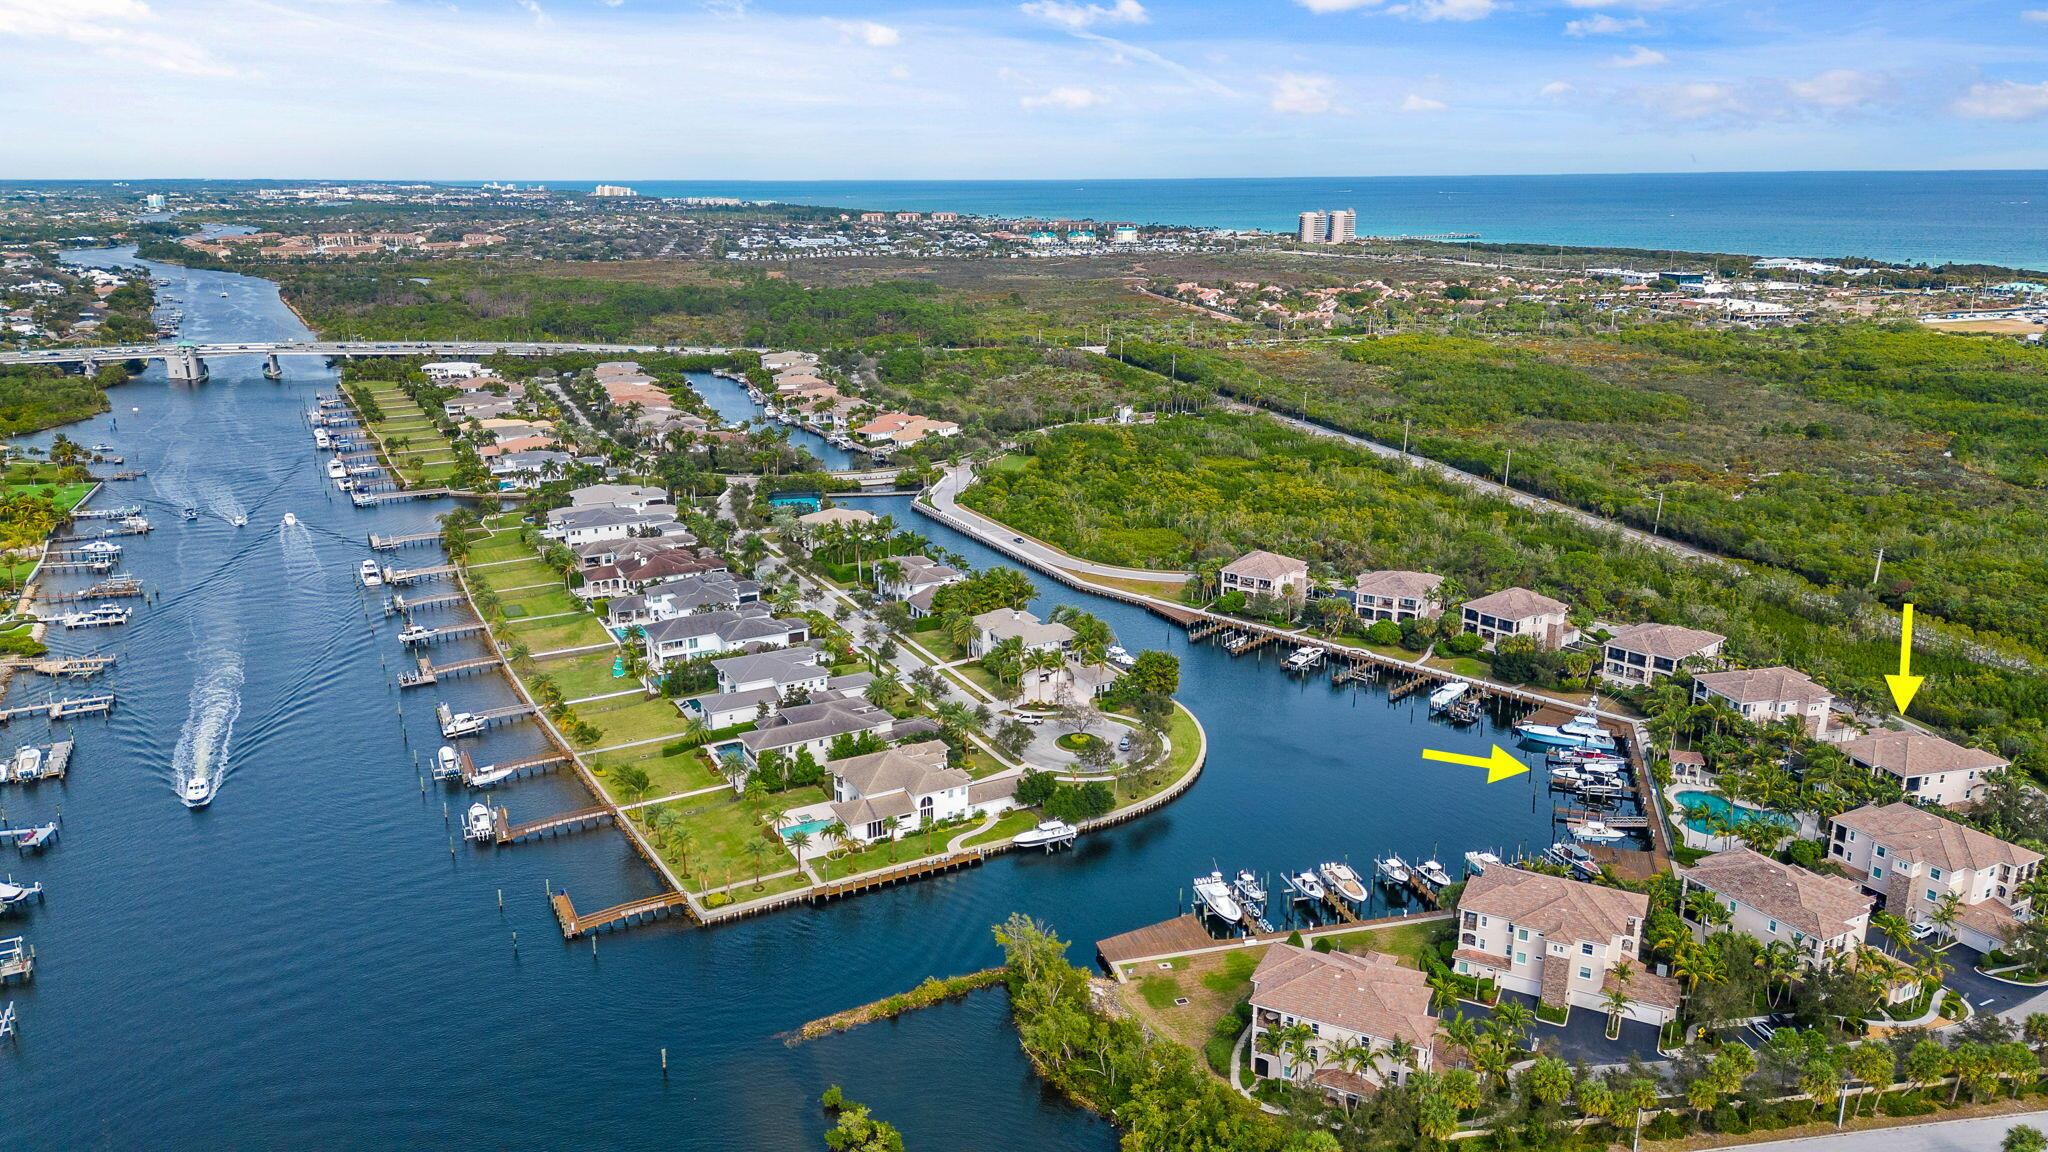 A luxury property in a premier location. Elegant 3-bedroom condo in exclusive Frenchman's Harbor. A gated, waterfront community, Frenchman's Harbor affords owners direct Intracoastal access, deep water slips, and no fixed bridges to the ocean. This property includes a deeded 45-foot boat slip for up to 60' vessel. The home itself features an efficient, airy floorplan with a large, open chef's kitchen. Wood floors, custom trim, custom built-ins, high ceilings, and appealing colors give this unit a bright, coastal feel. Oversized balcony offers canal, pool, Intracoastal and sunset views. The best of condo and single family living with a private 2 car garage and plenty of driveway space. Unit is accessible with staircase and elevator options. Full hurricane impact windows and doors.